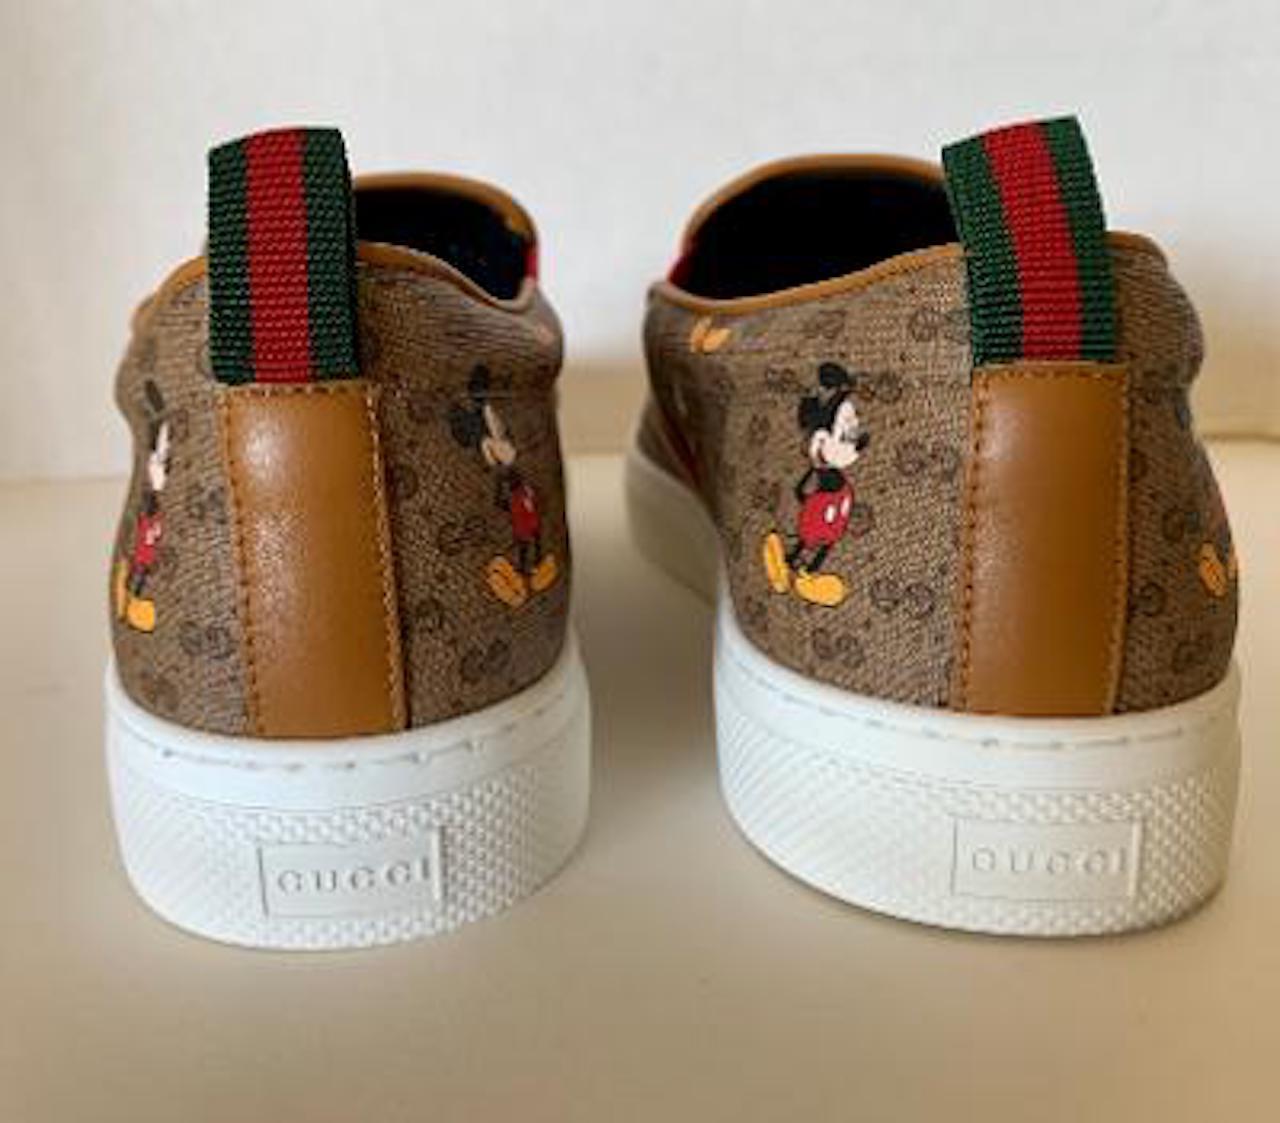 SOLD OUT Gucci Mickey Mouse Men's Size 10.5 Slip-on Sneakers 1